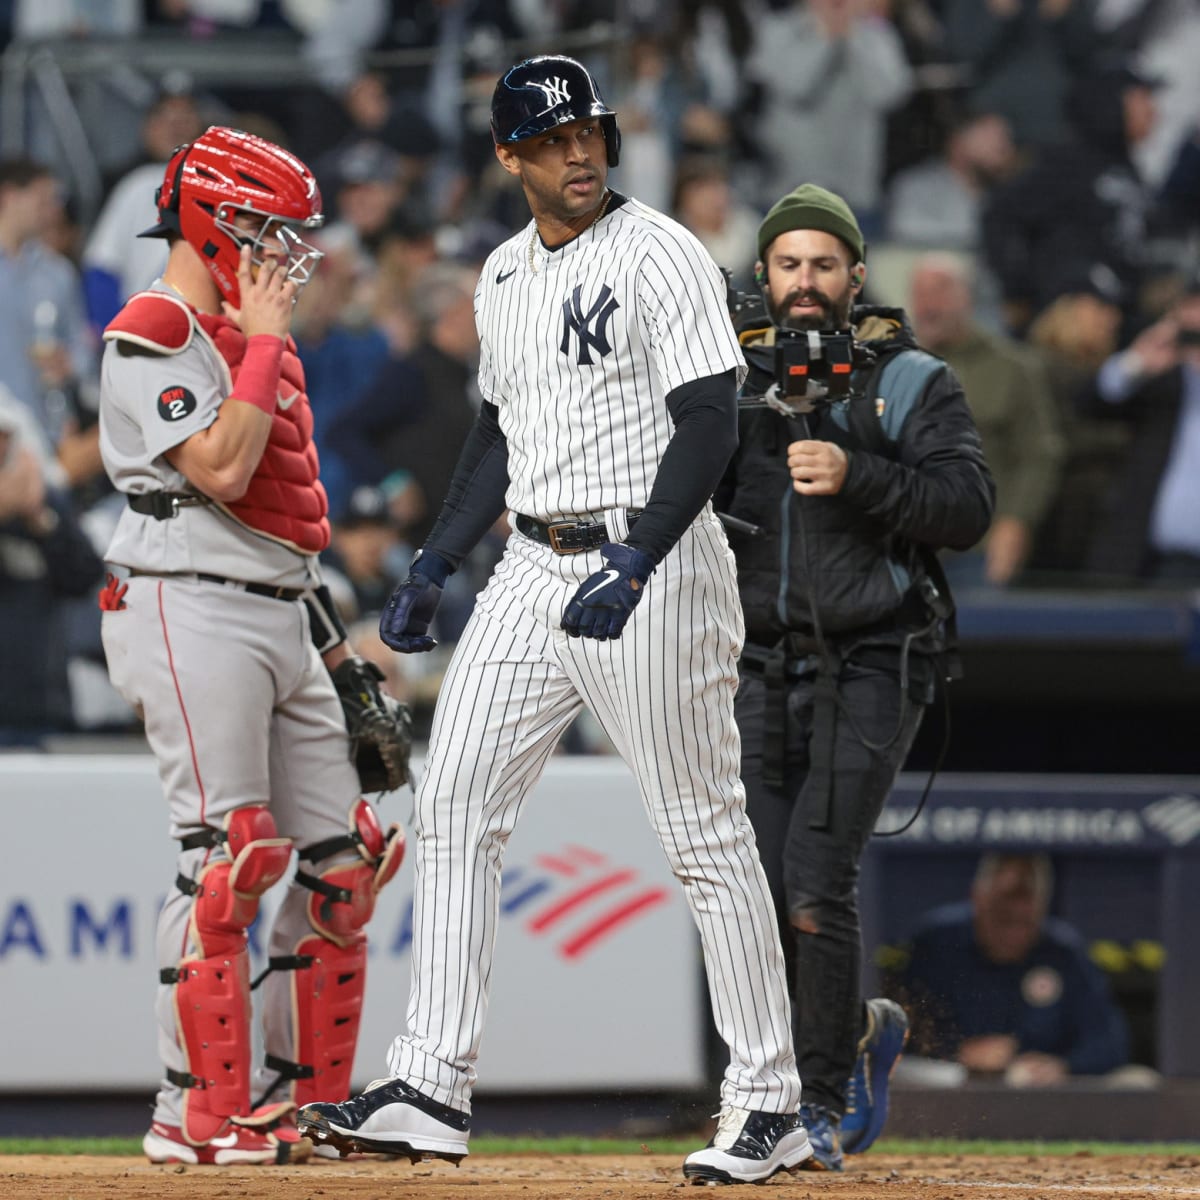 Yankees' Aaron Hicks designated for assignment: 'Got to move on to the next  chapter